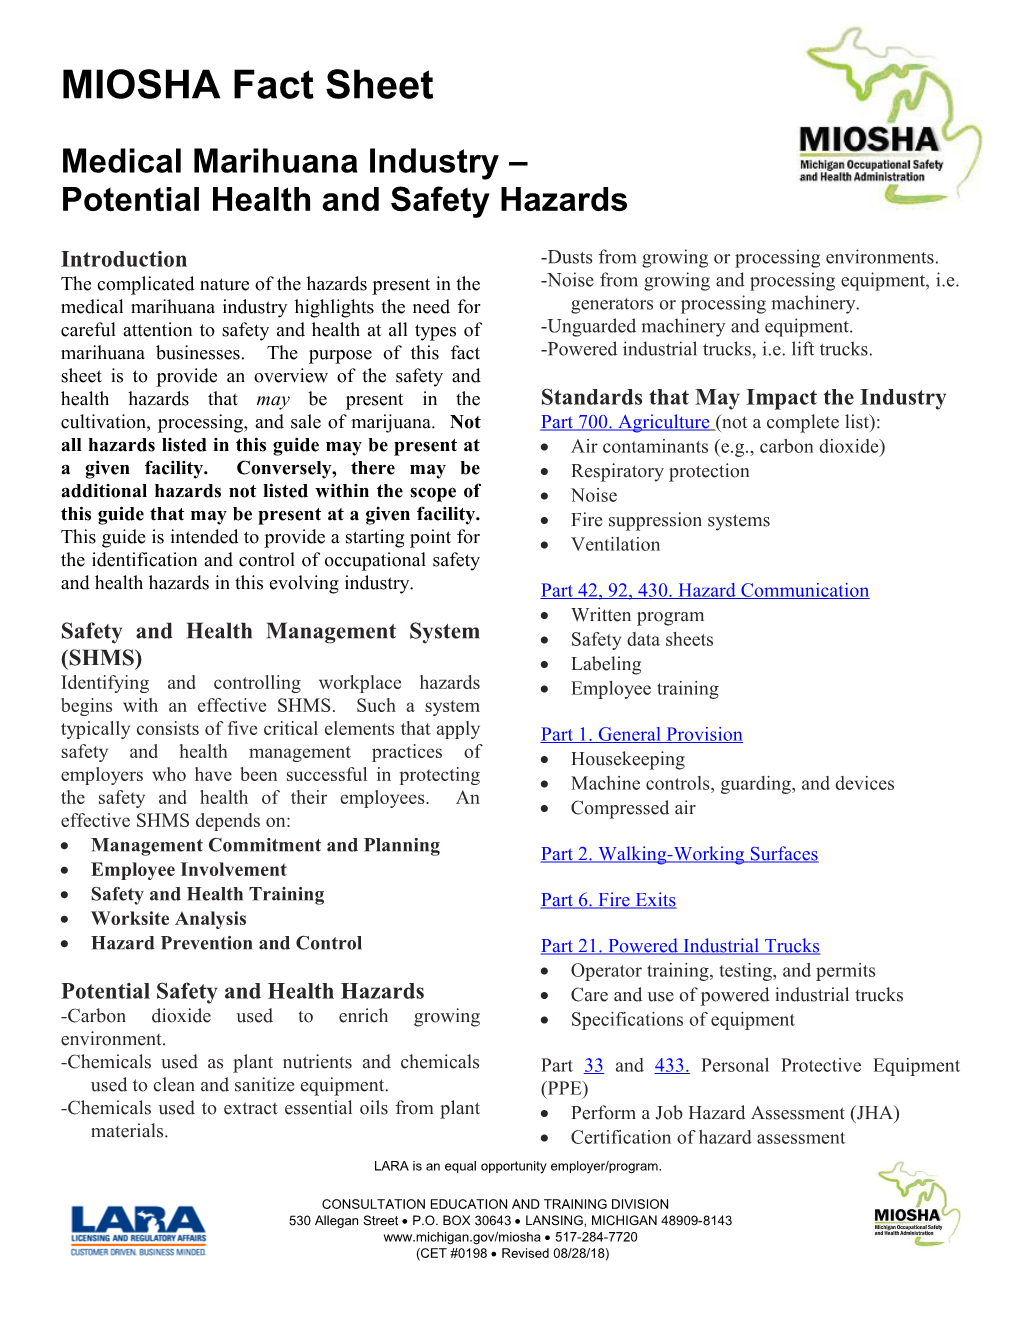 Potential Health and Safety Hazards in the Medical Marihuana Industry